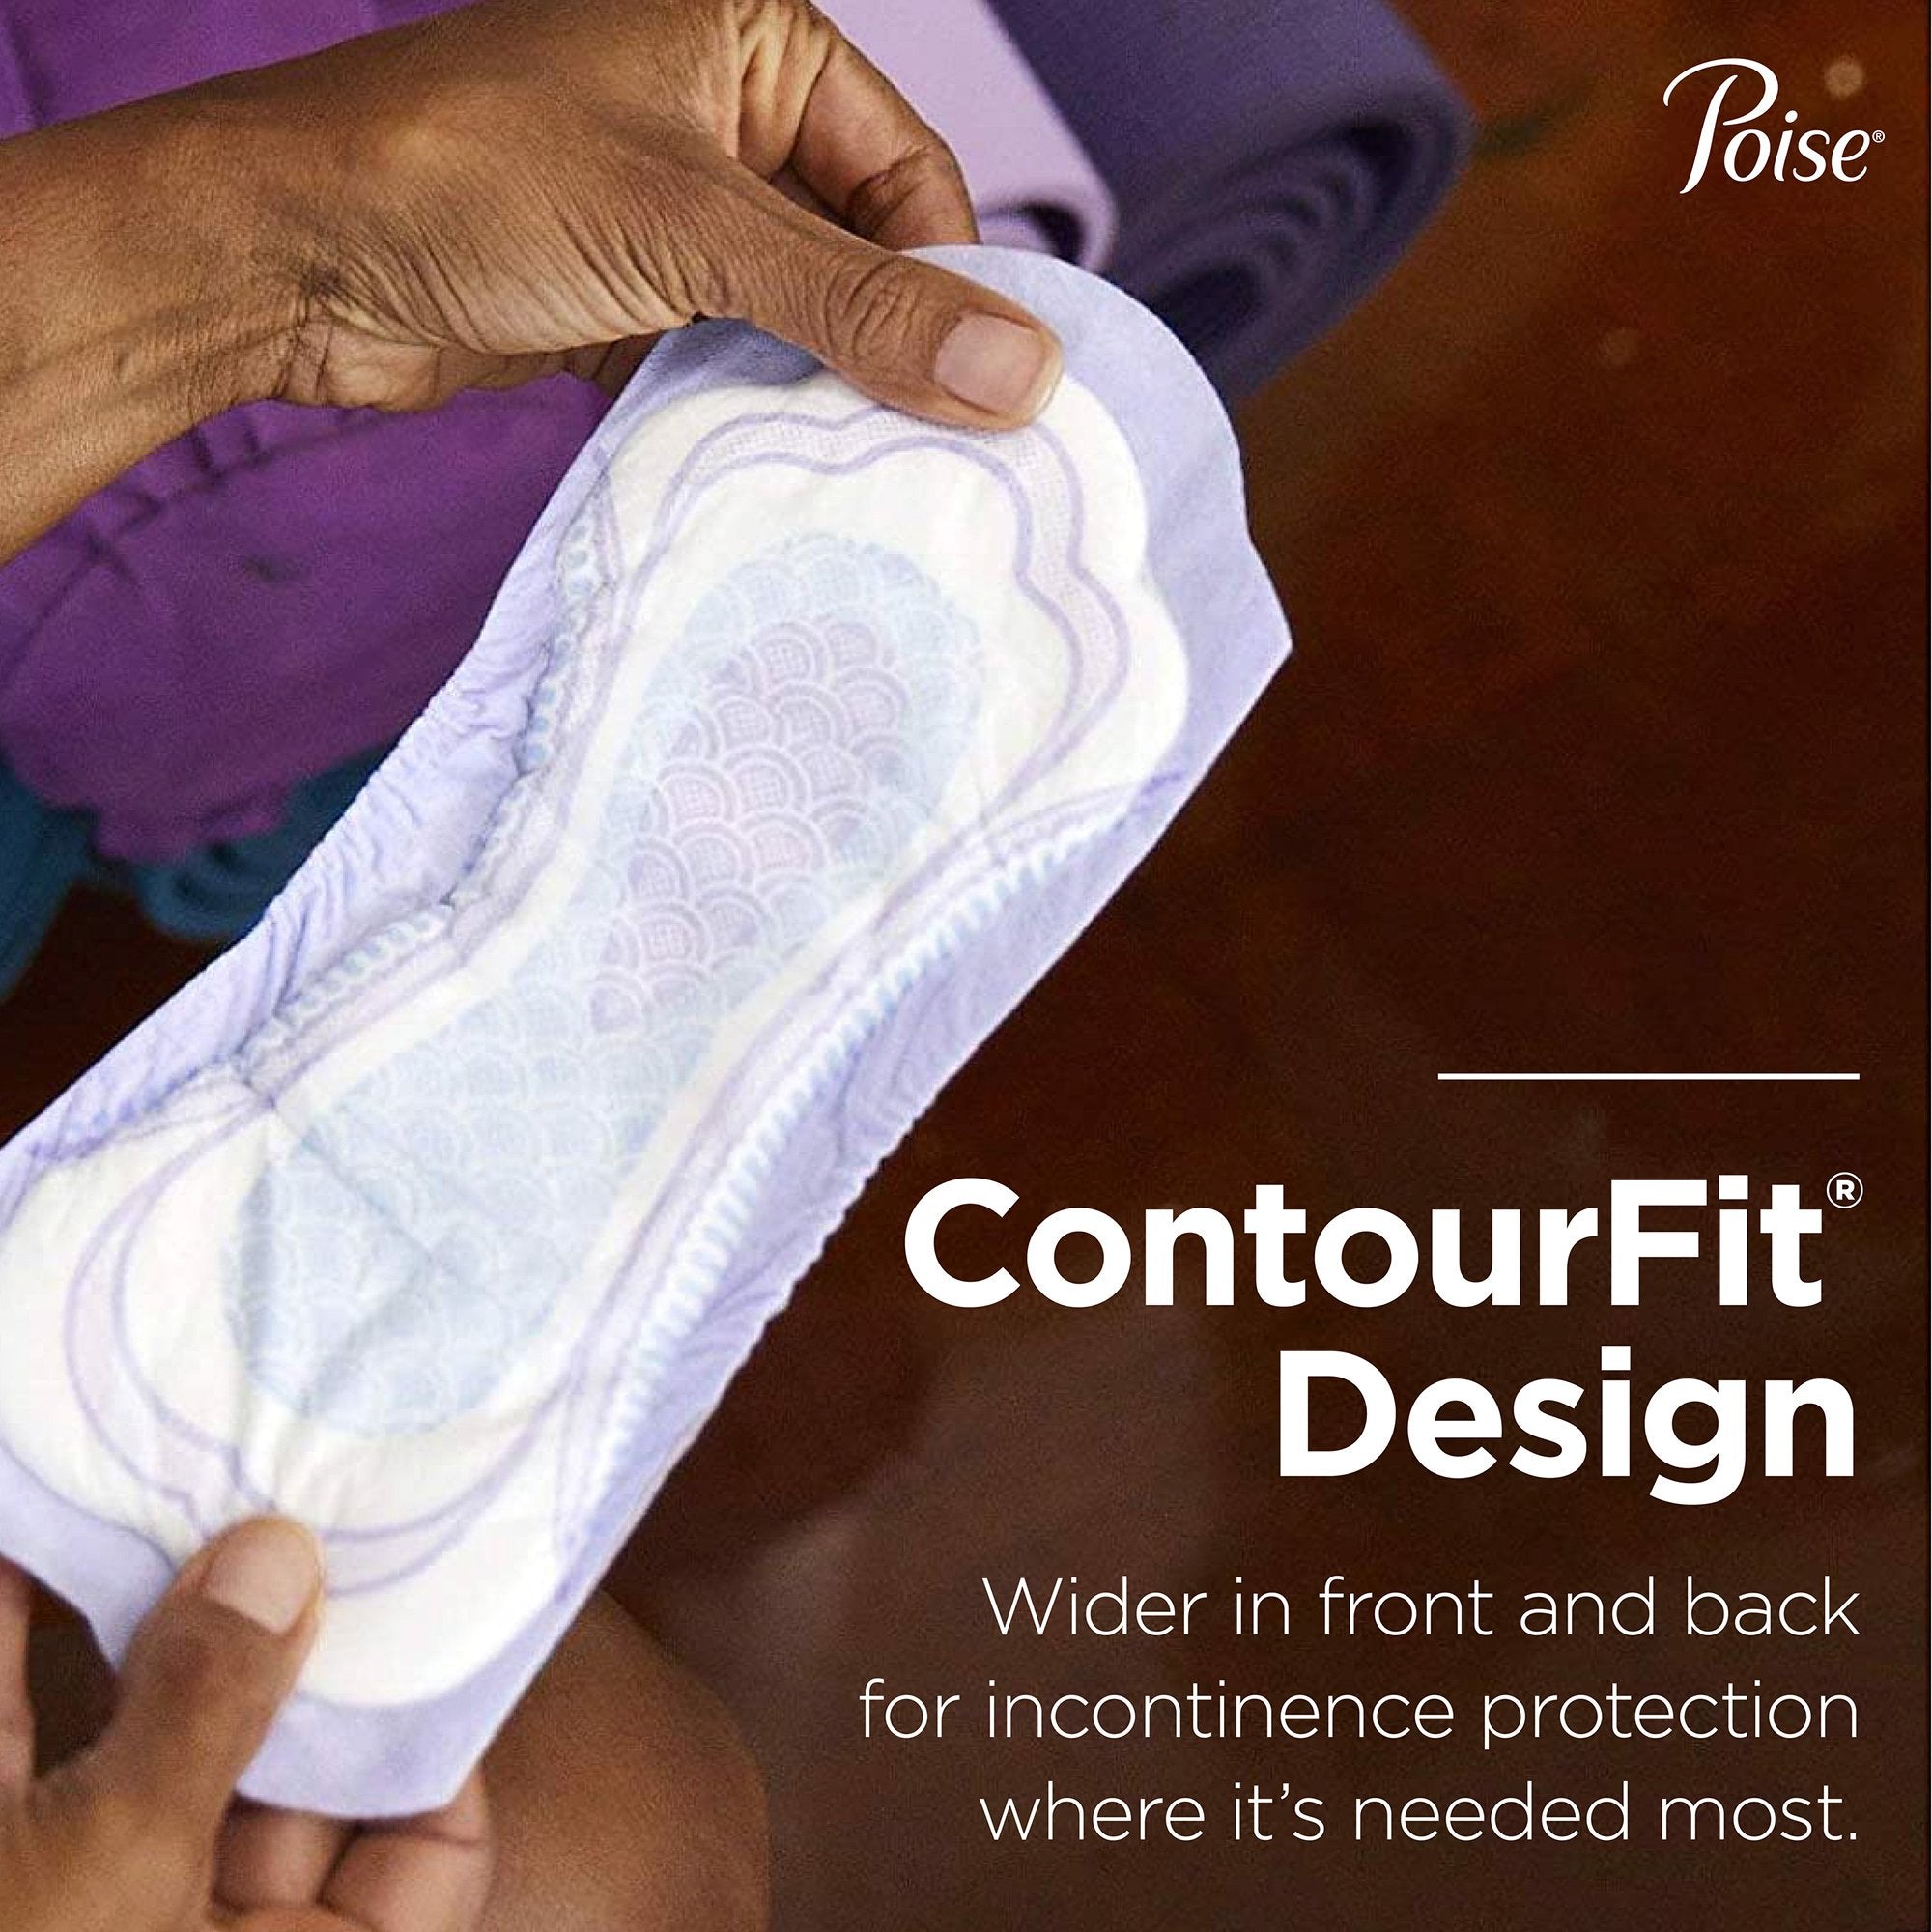 Bladder Control Pad Poise 15.9 Inch Length Heavy Absorbency Sodium Polyacrylate Core One Size Fits Most